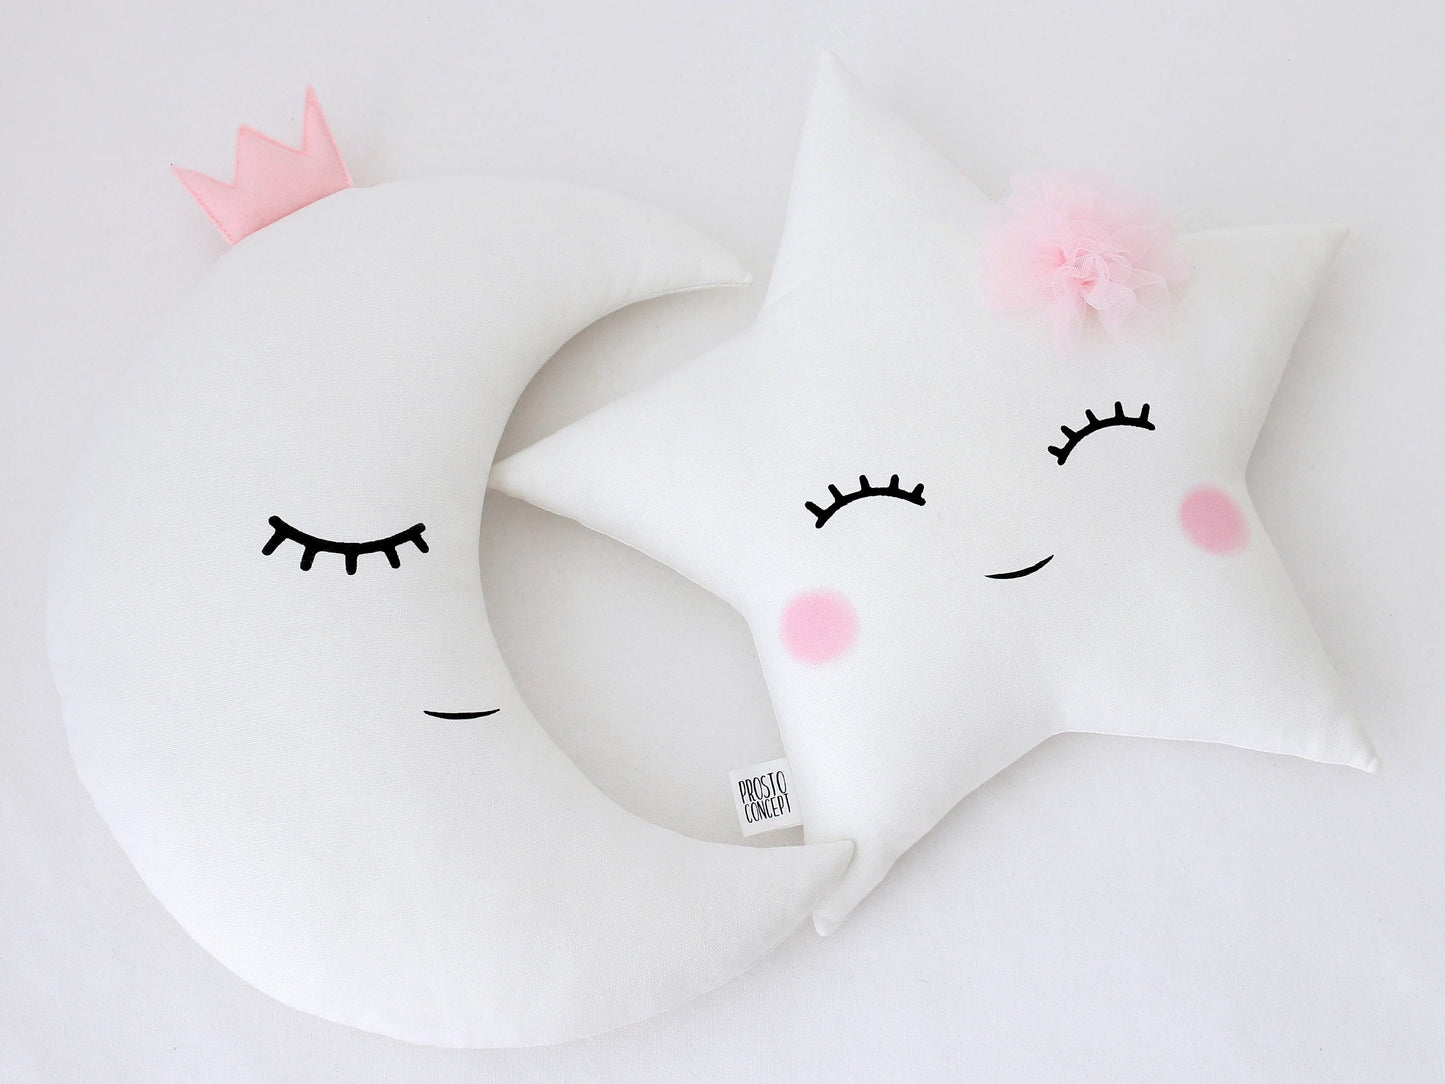 Set of 3 Pillows - Cloud (2 colors), White Crescent Moon and White Star Pillows with Pale Pink Touch